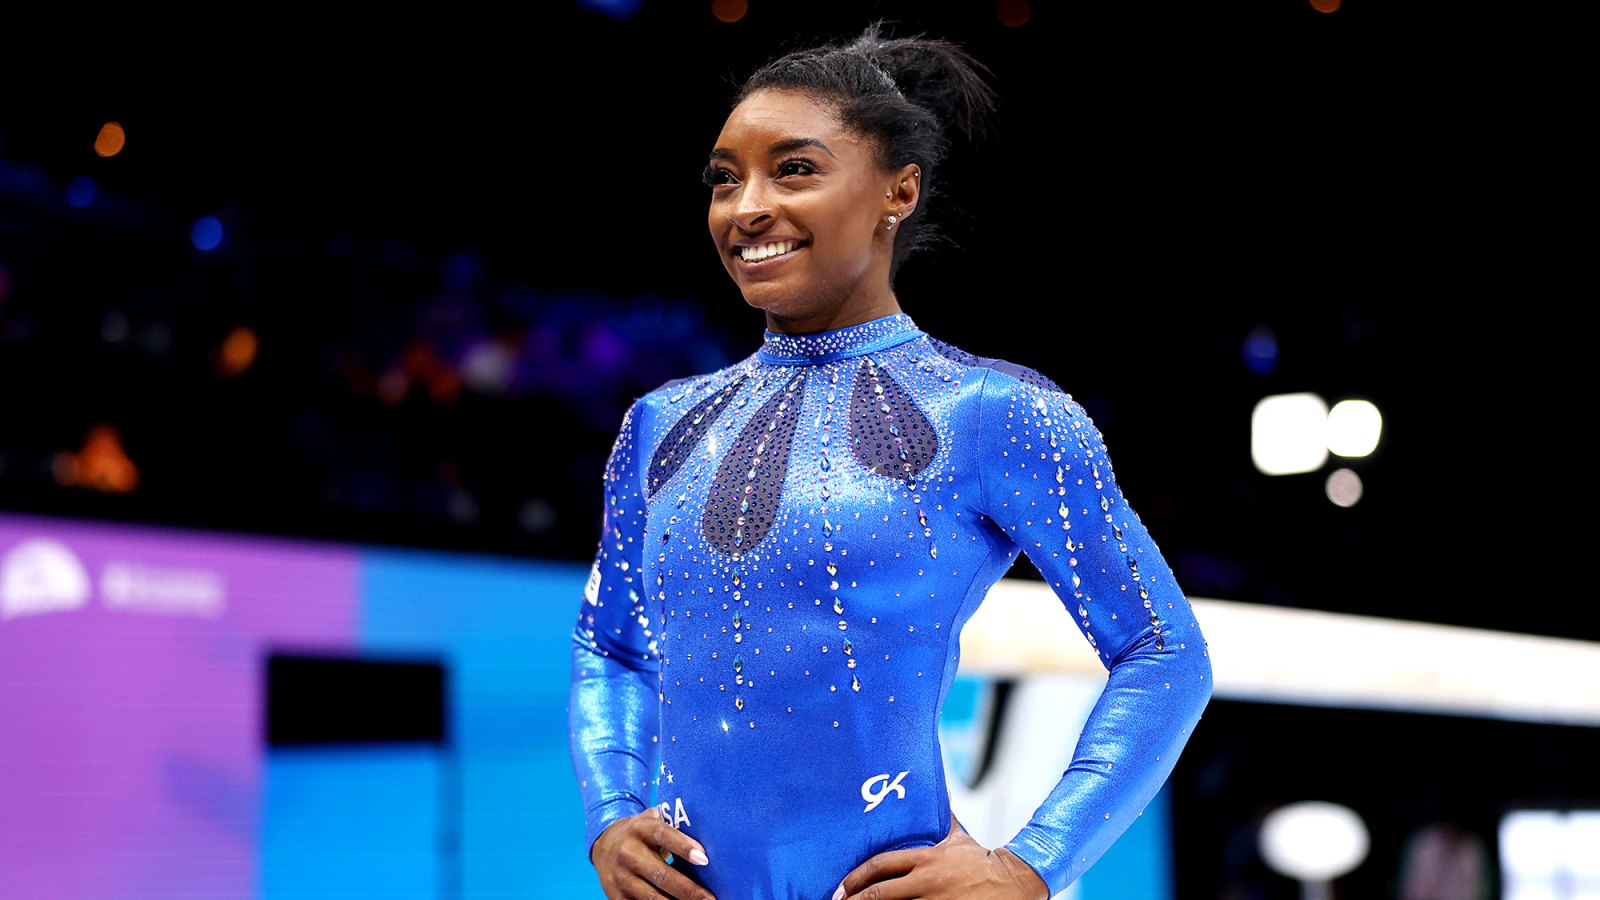 Simone Biles Calls Worlds ‘Unexpected’ After Becoming the Most Decorated Gymnast of All Time